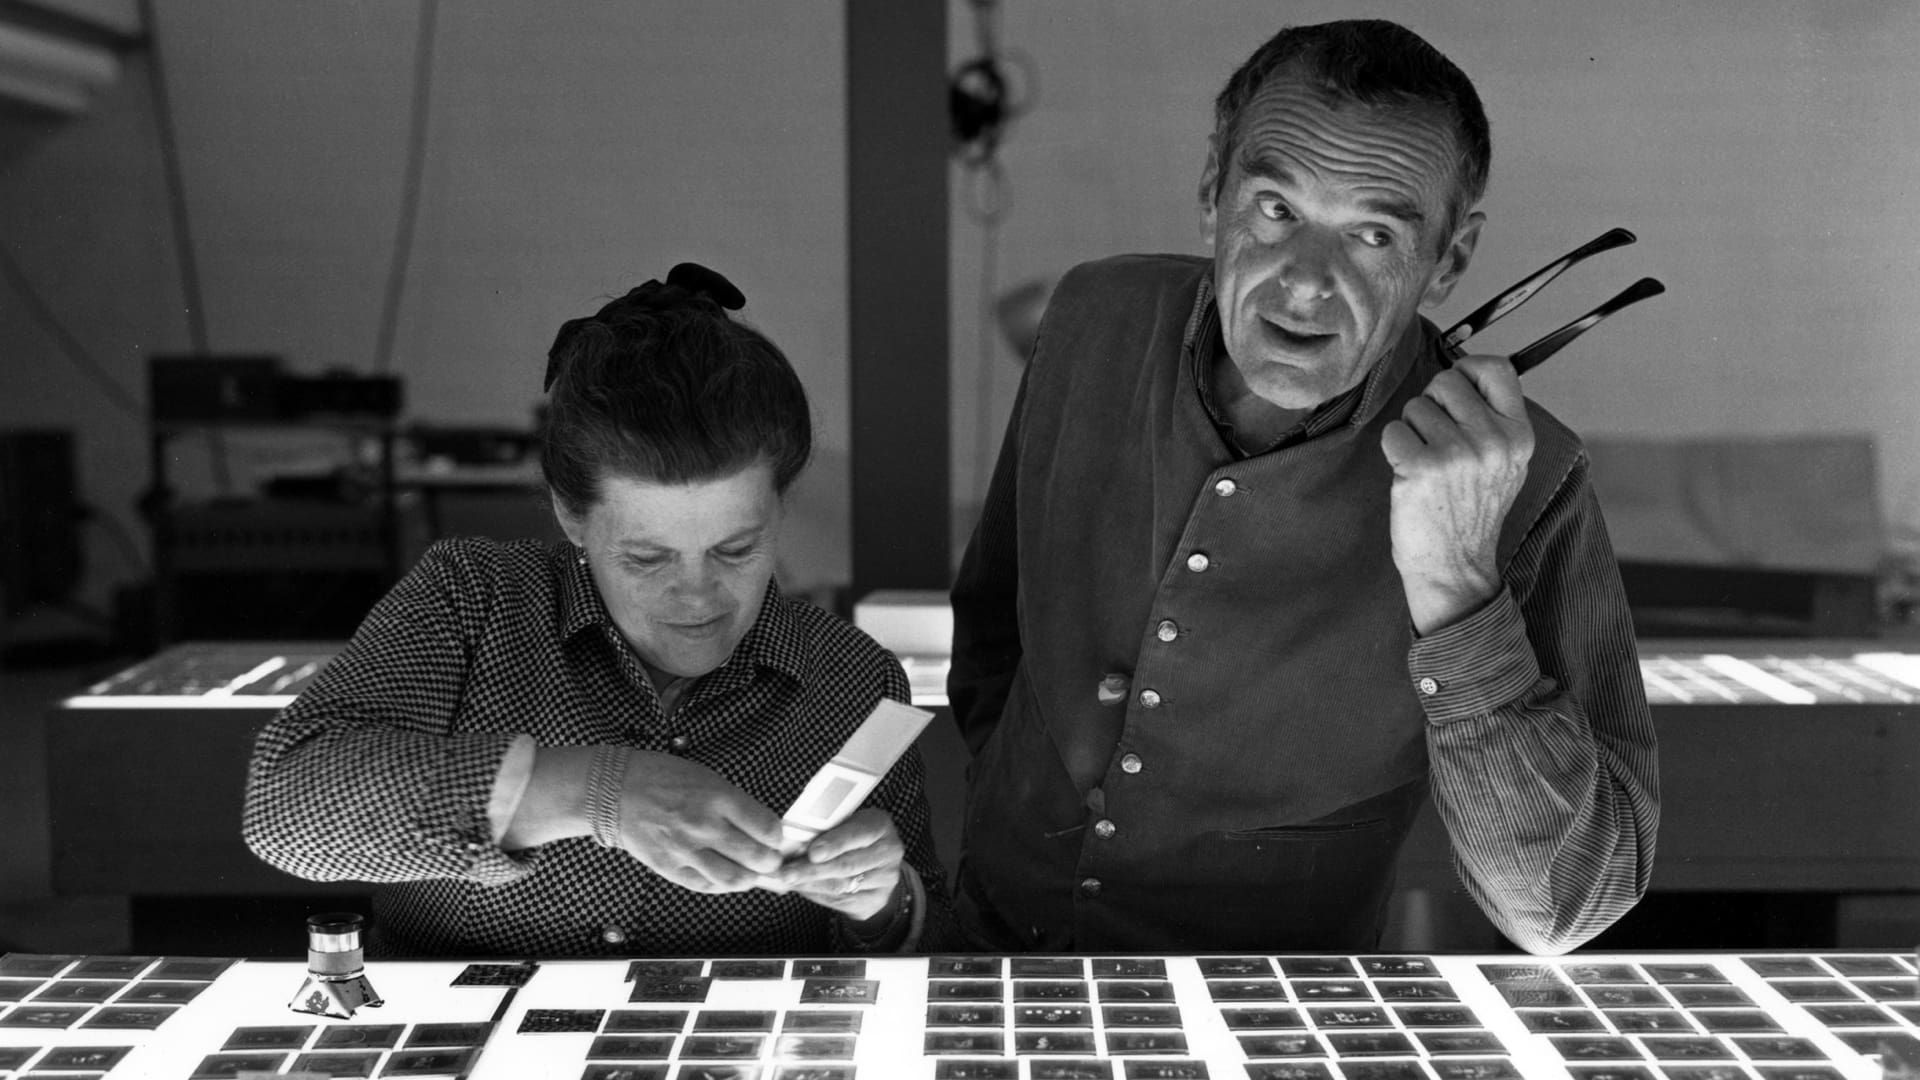 Eames: The Architect & The Painter background